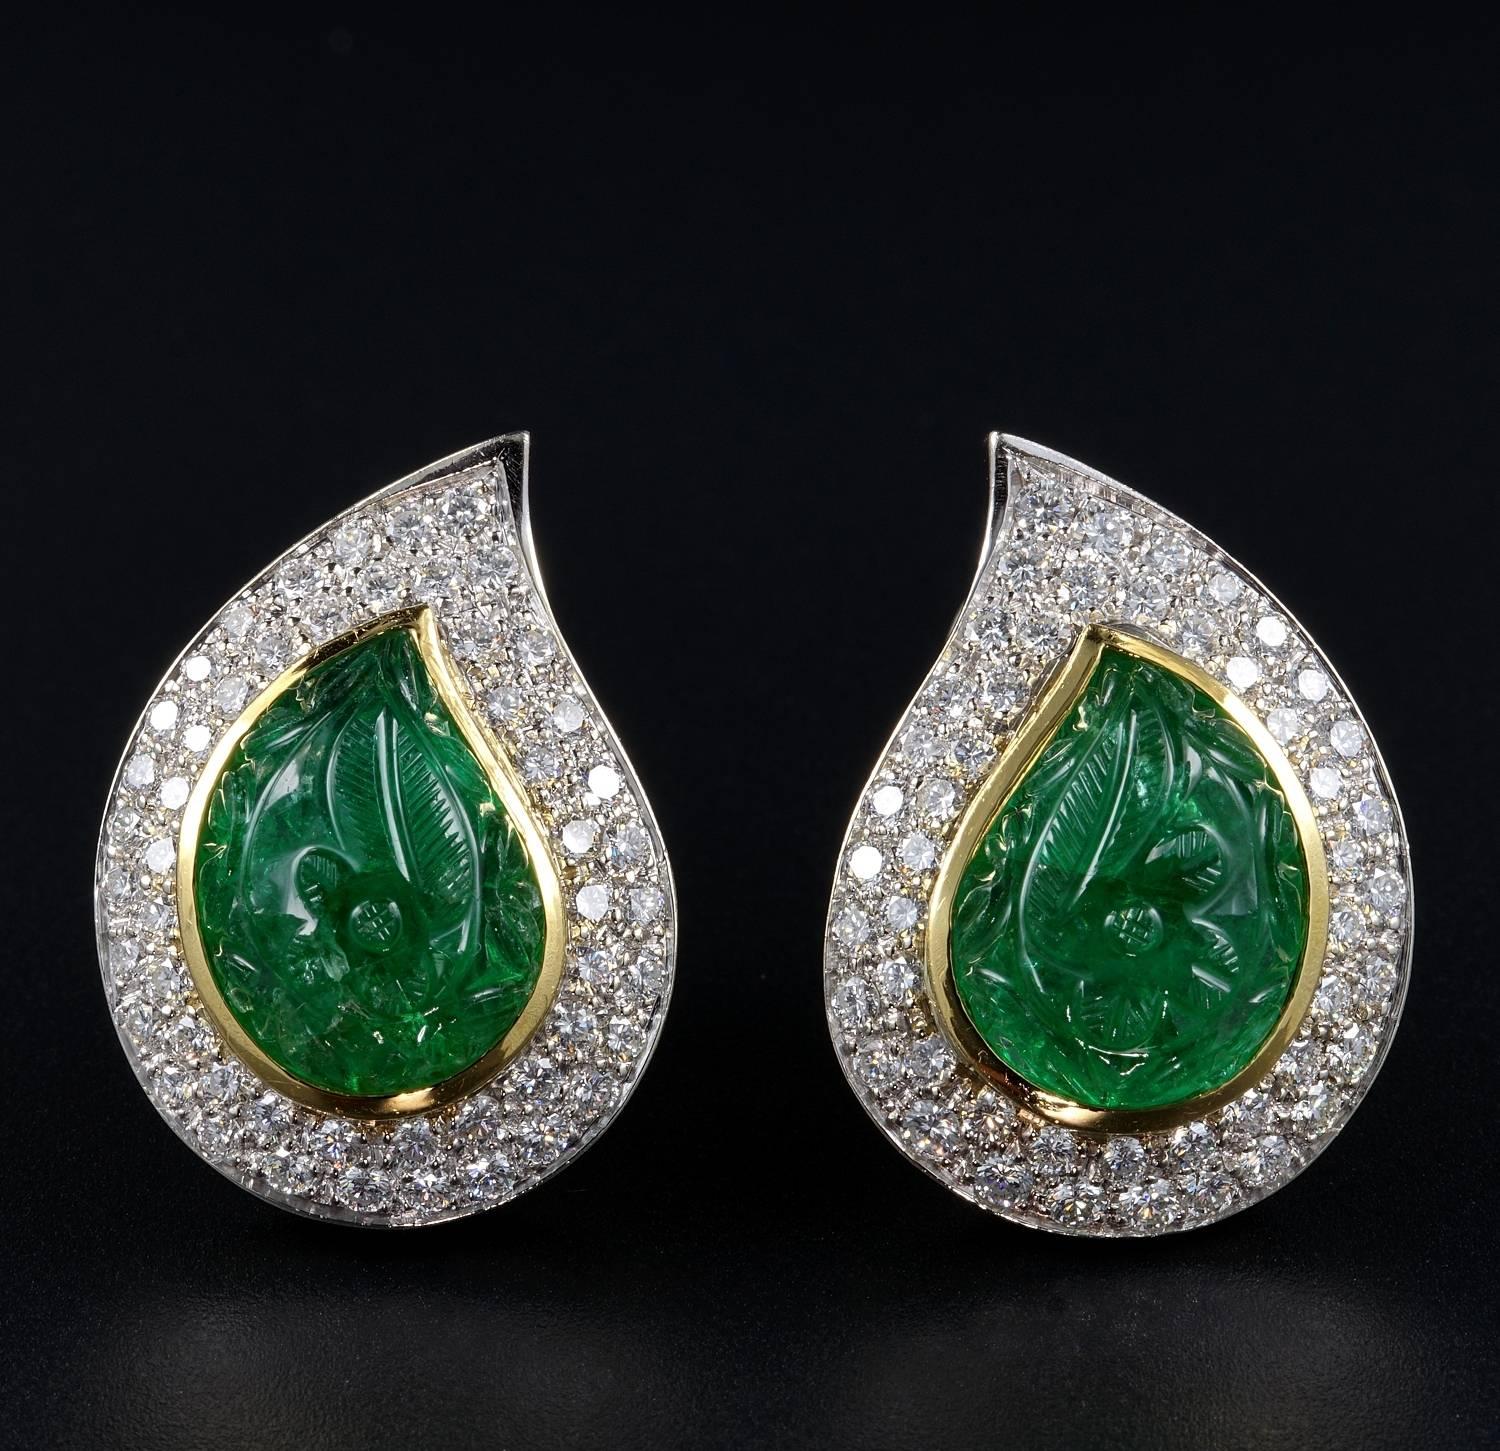 The Maharajah Empire
An impressive pair of vintage Carved Mughal Emerald and Diamond earrings
Imposing large sized so eyecatching and sensational being of relevant size, stunning in crafting
Hand crafted of solid 18 KT gold taking shape inspiration